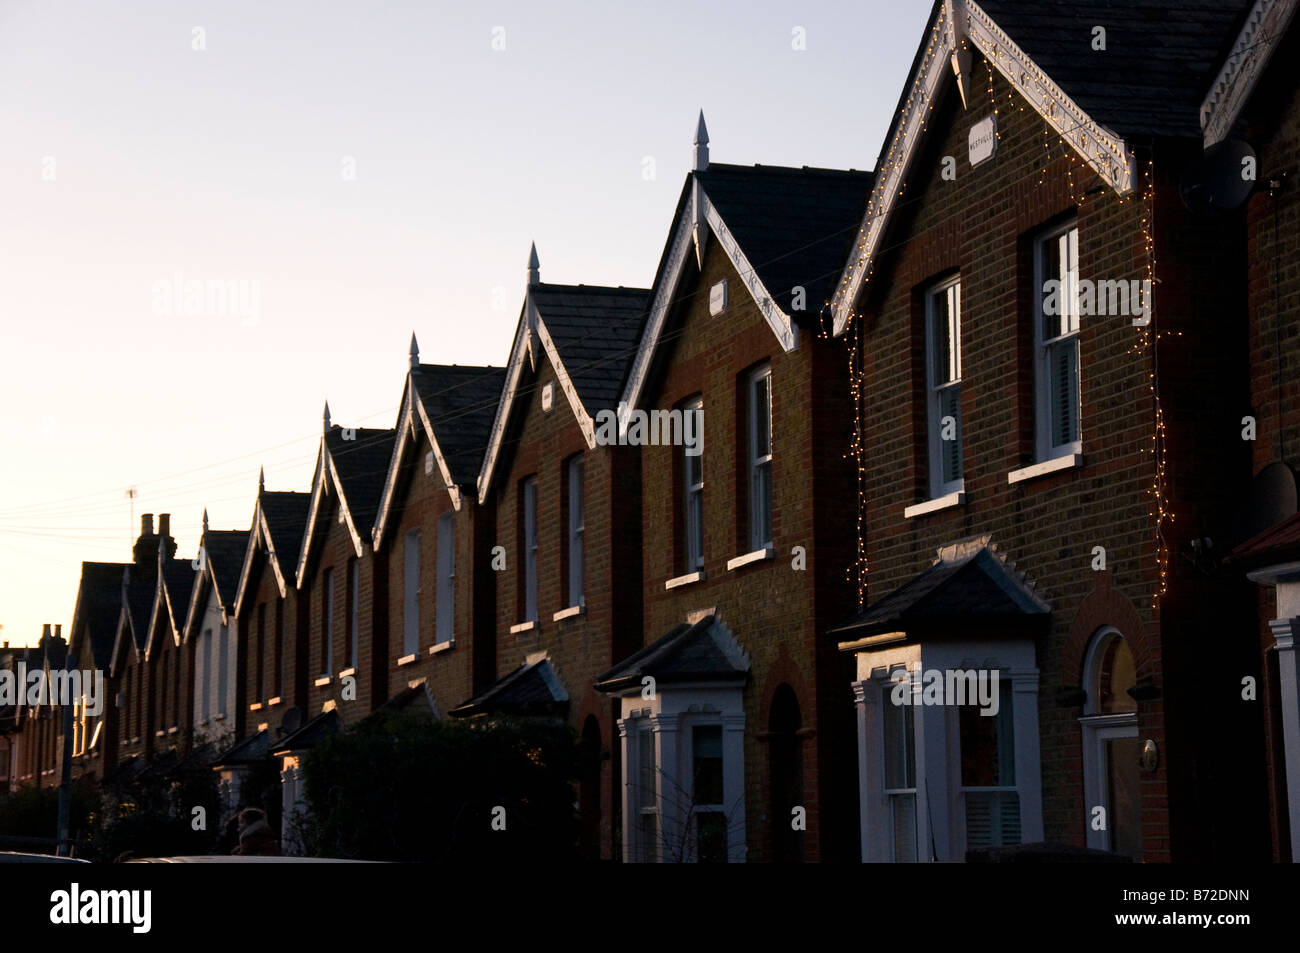 Evening light reflected in the windows and eaves of a row of detached houses on a UK street christmas lights on one house Stock Photo